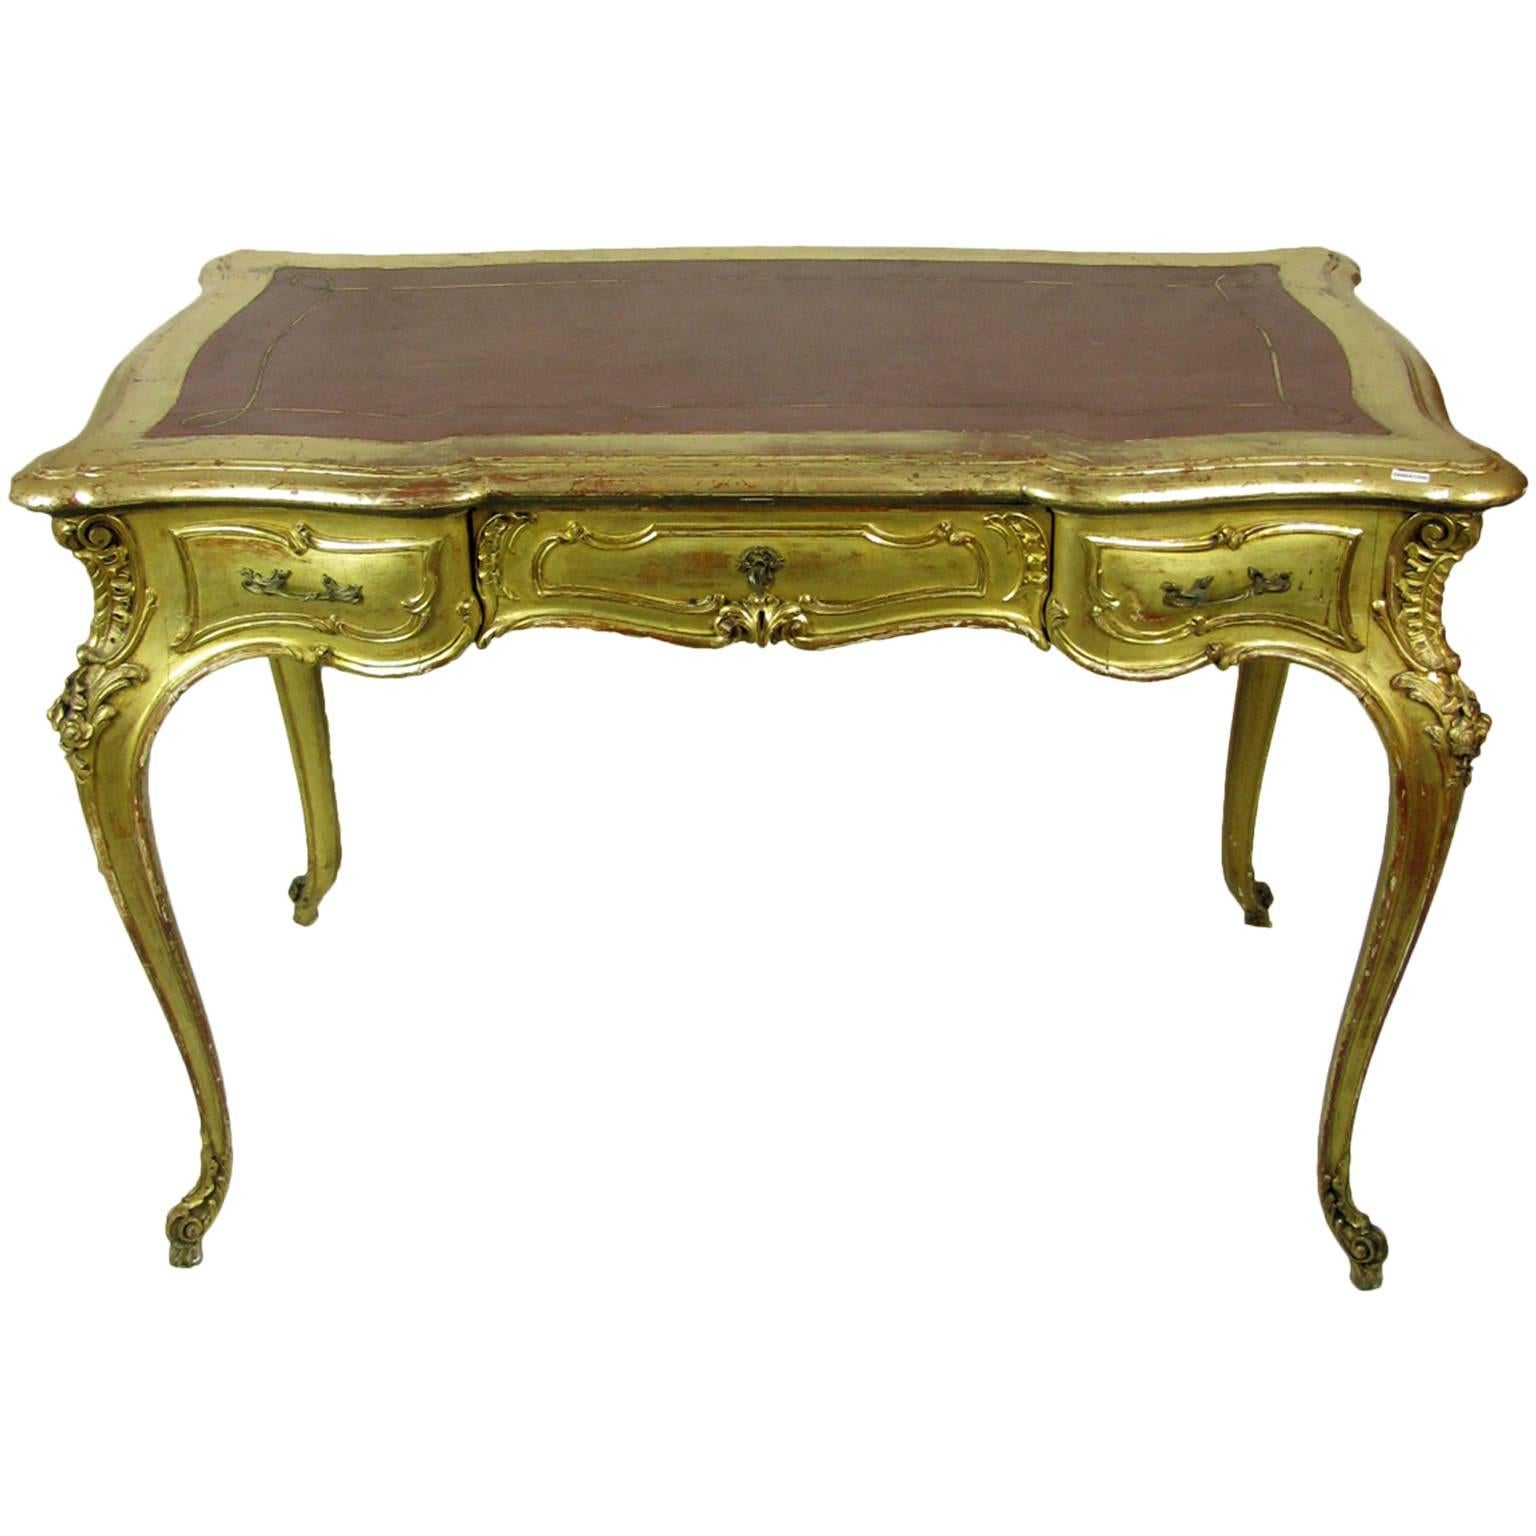 Mid-20th Century Carved and Giltwood Desk, Italian Louis XV Style Writing Table